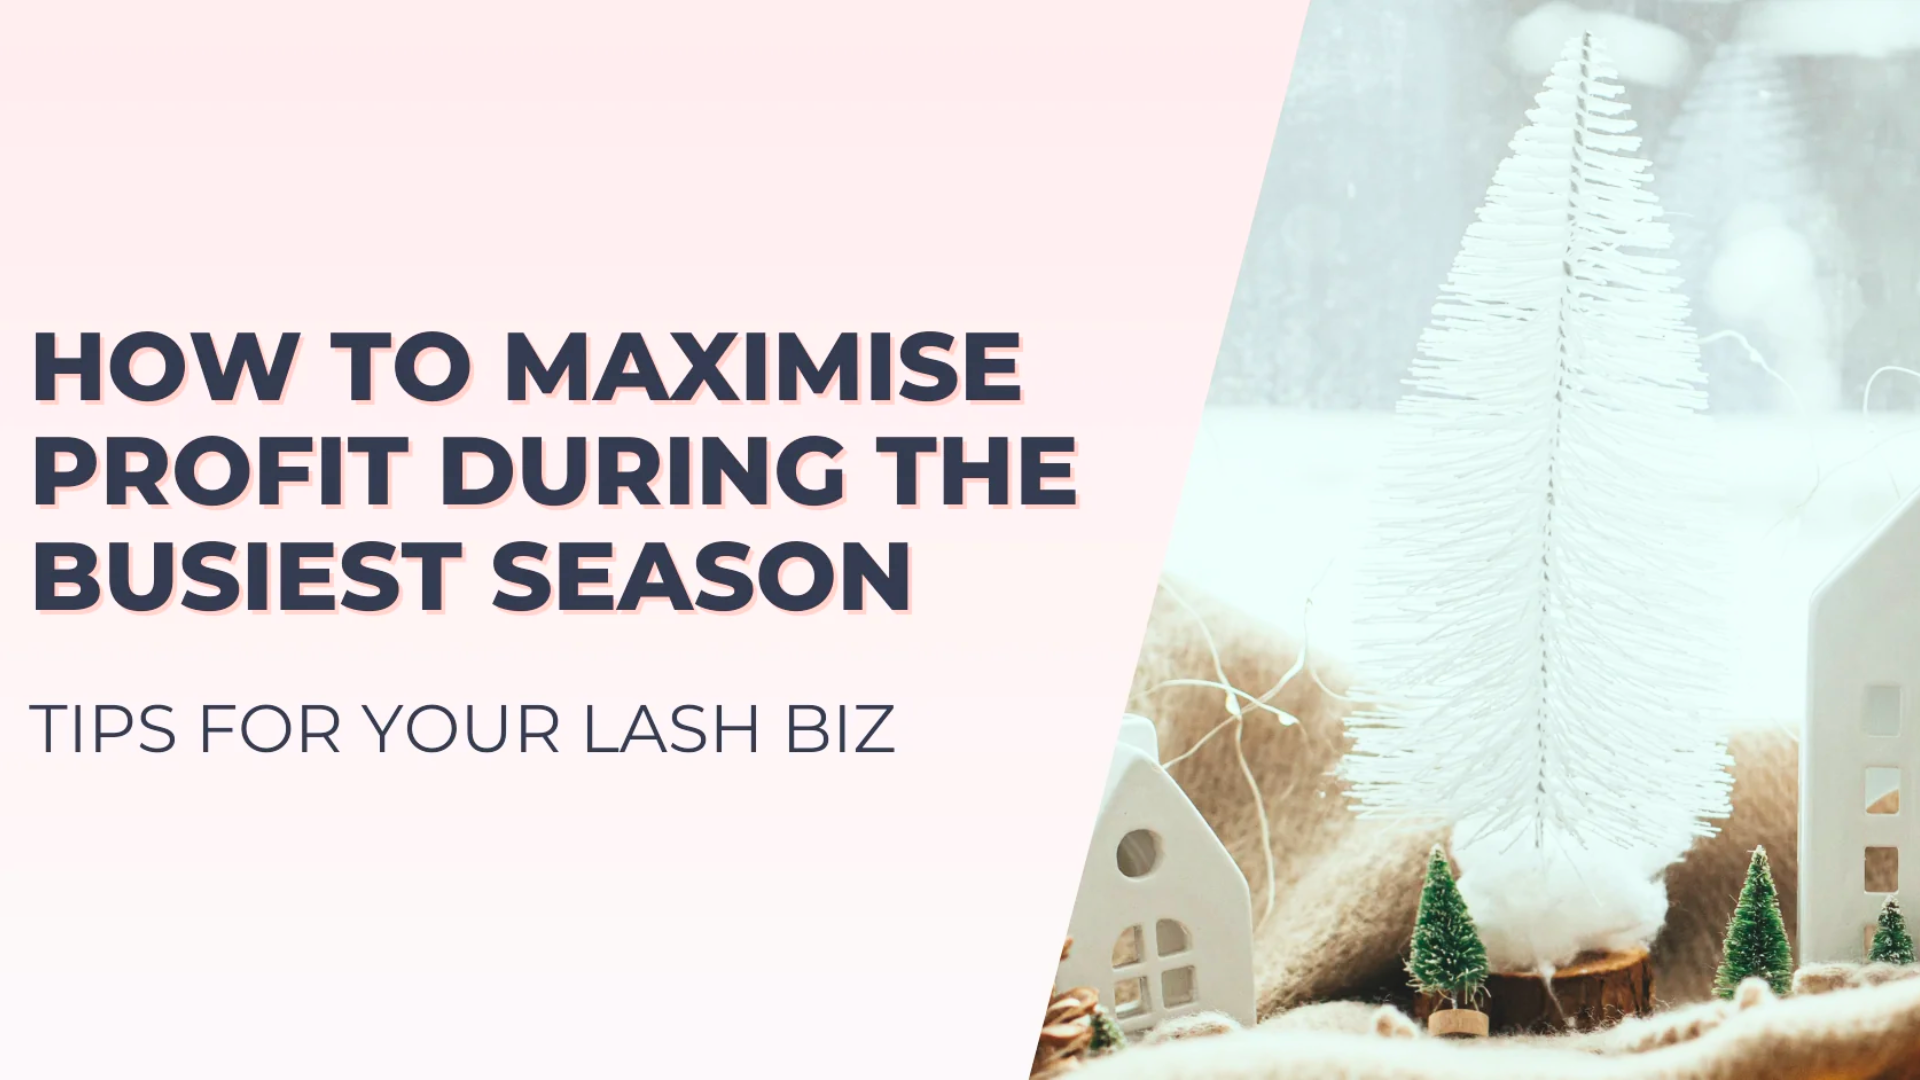 How to Maximise Your Profit During the Busiest Season – Tips for Your Lash Biz